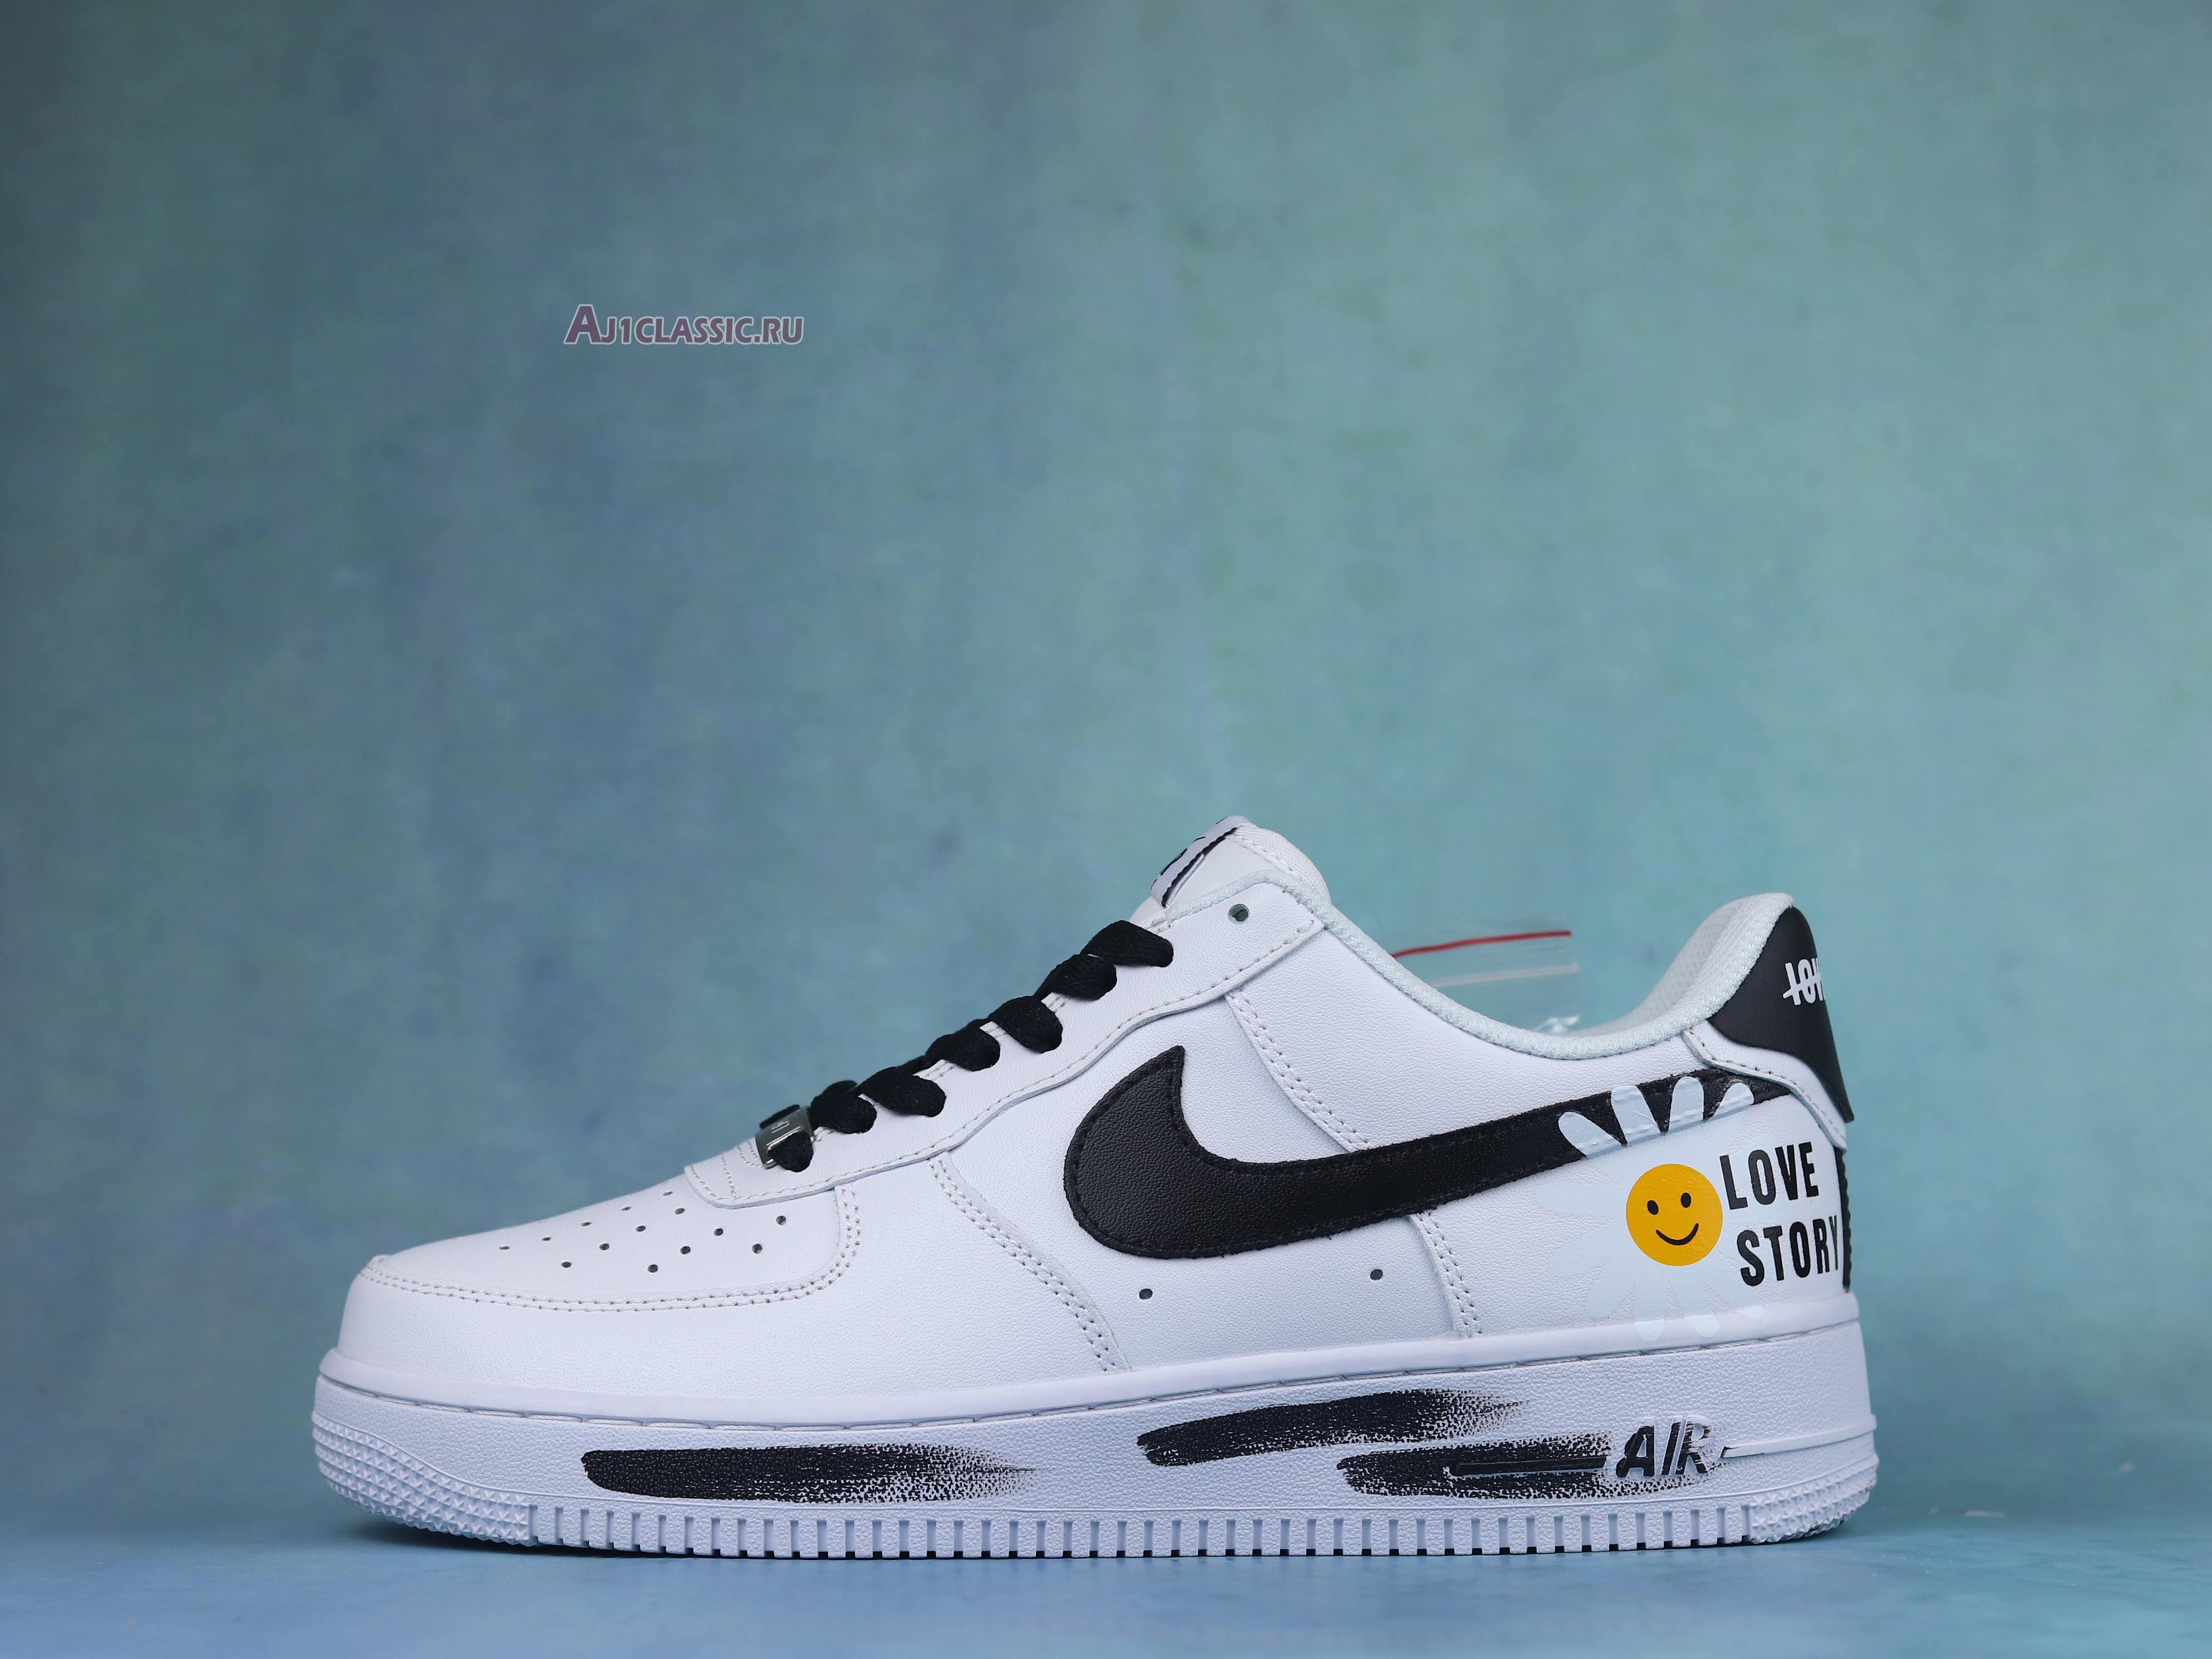 G-Dragon x Air Force 1 07 Love Story DO5220-176 White/Black/Yellow Sneakers